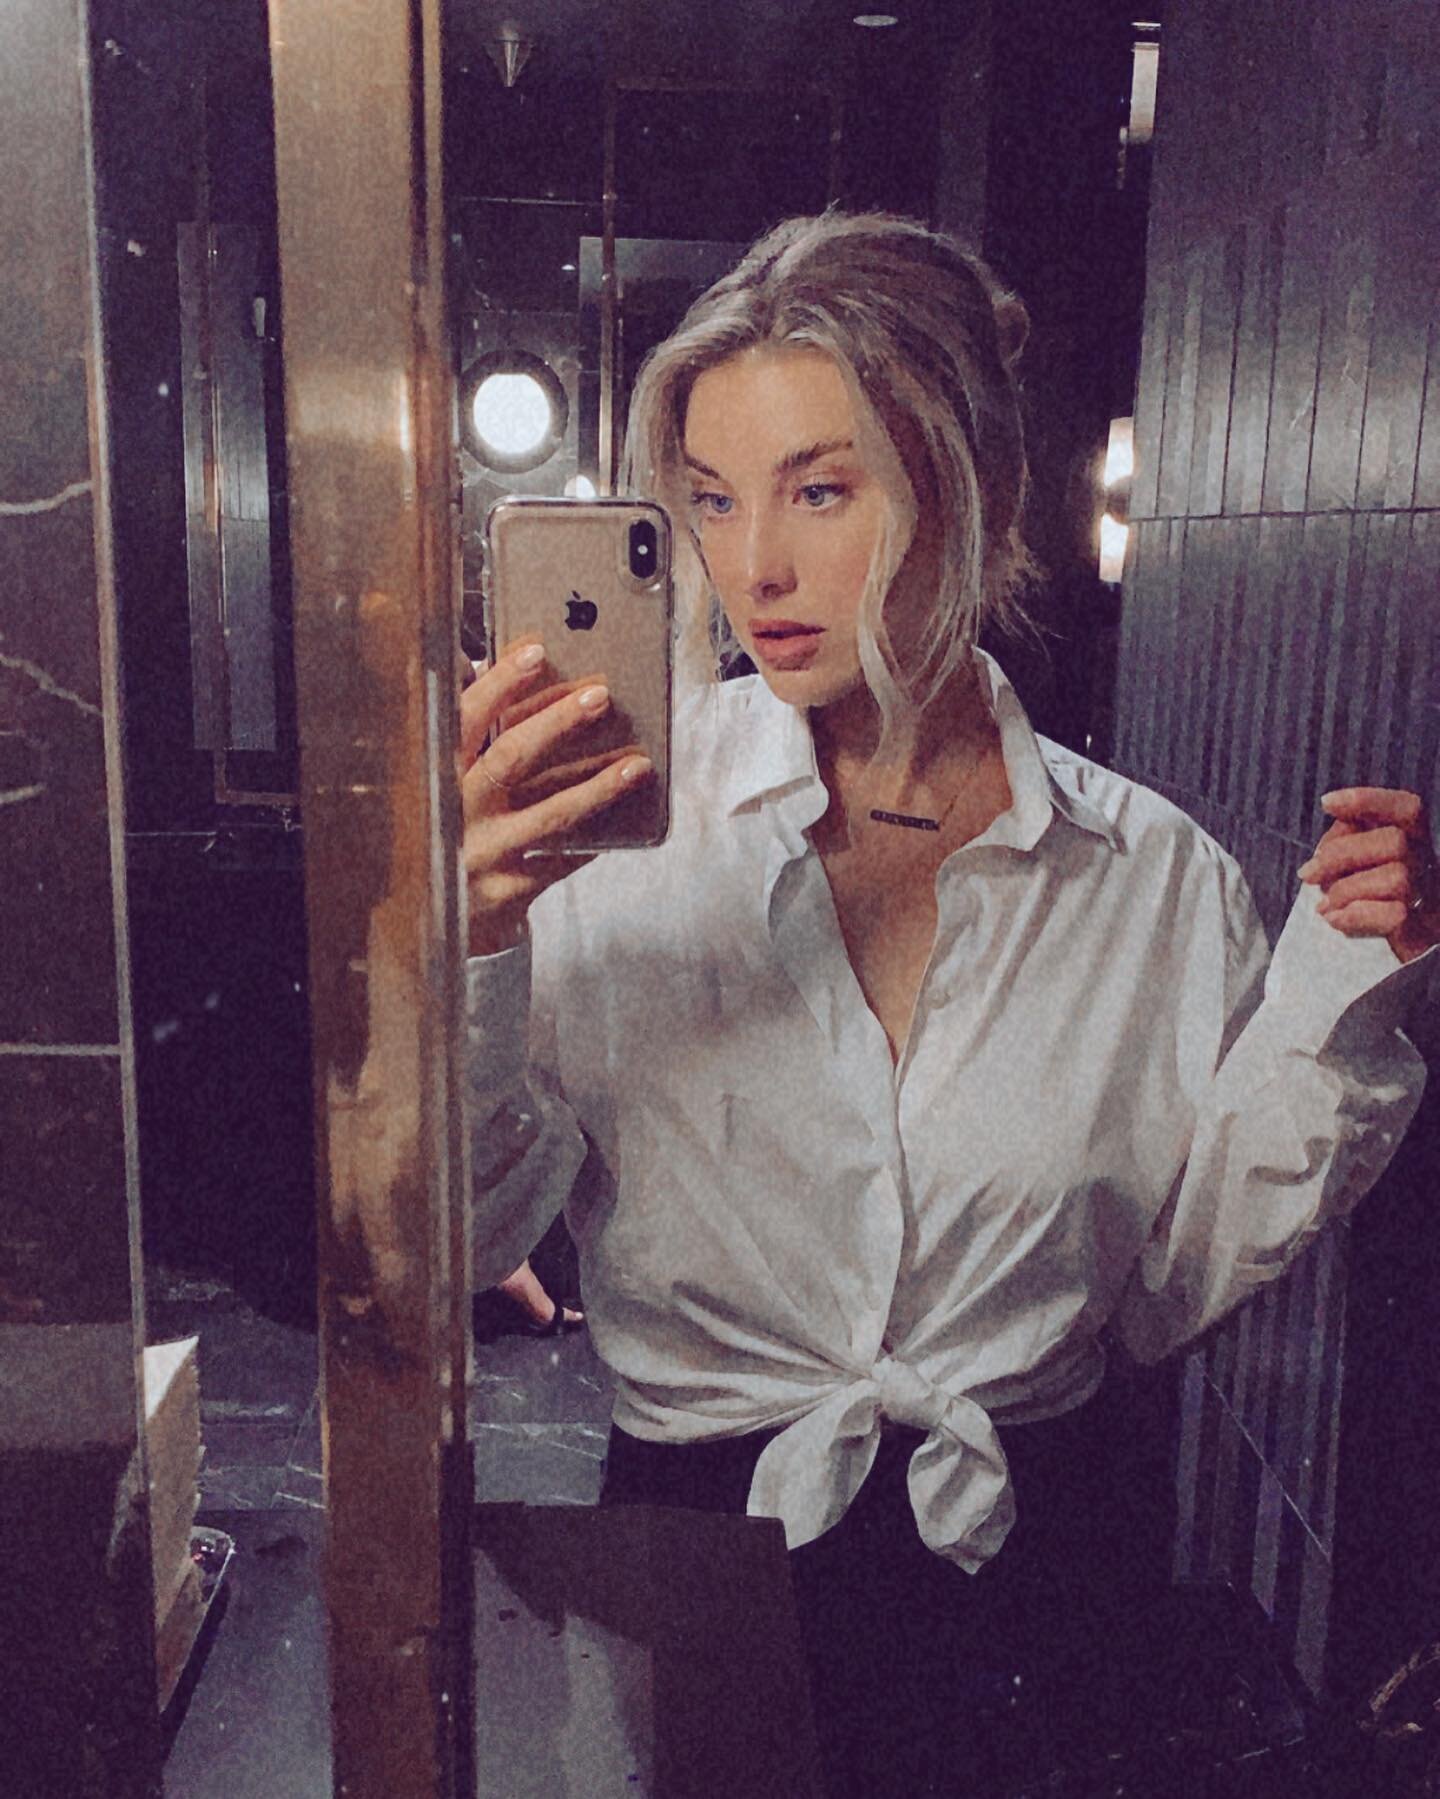 Remember that time we could go to a restaurant and eat and take selfies in the washroom? Those were the good ole days.. #openeverythingthefuckup